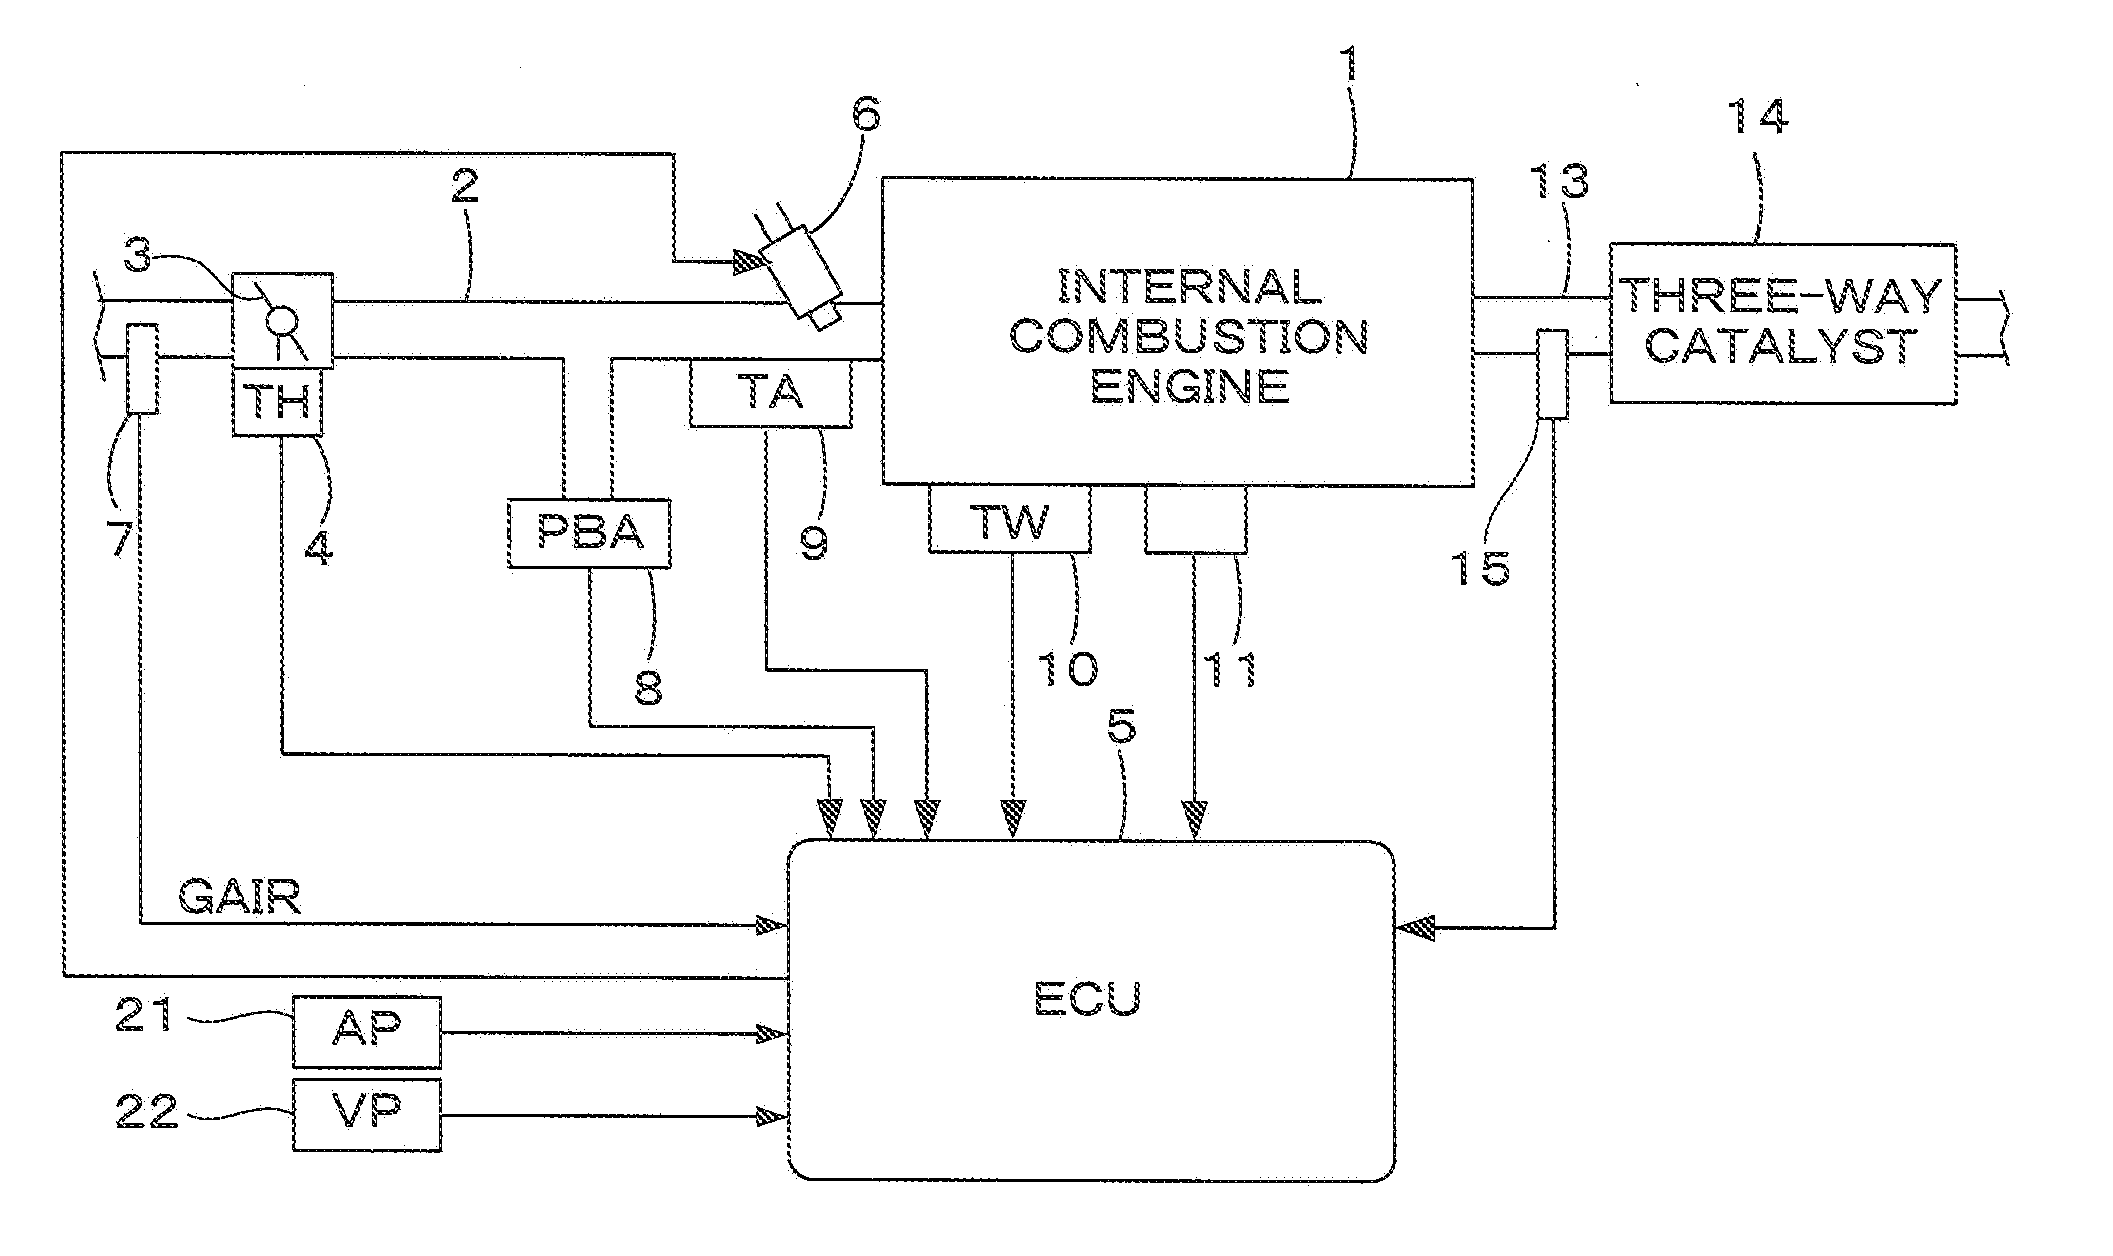 Air-fuel ratio control system for internal combustion engine